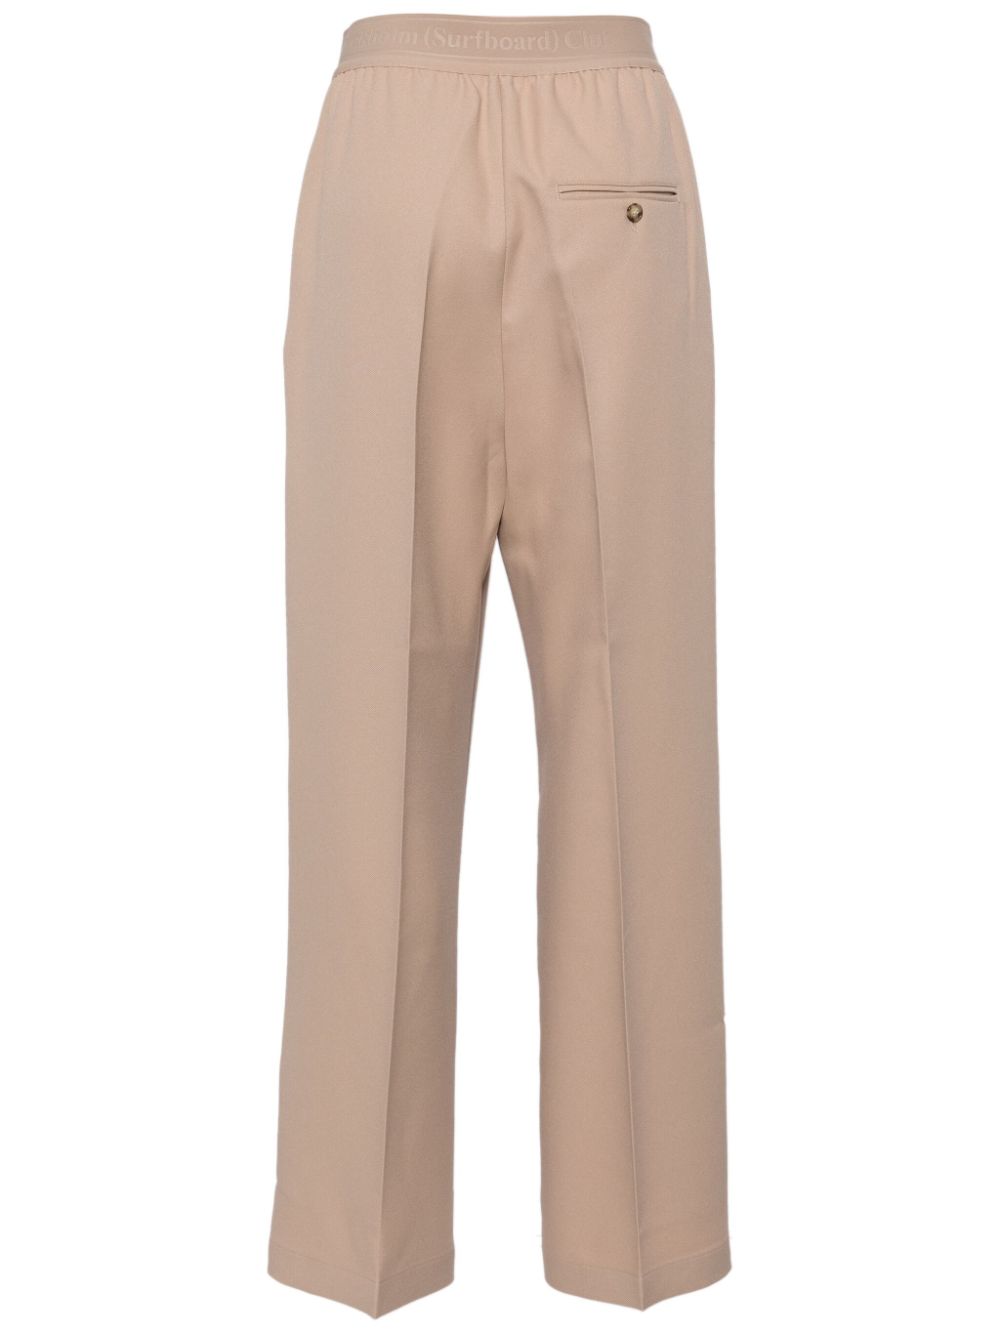 Stockholm Surfboard Club pressed-crease straight trousers - Beige